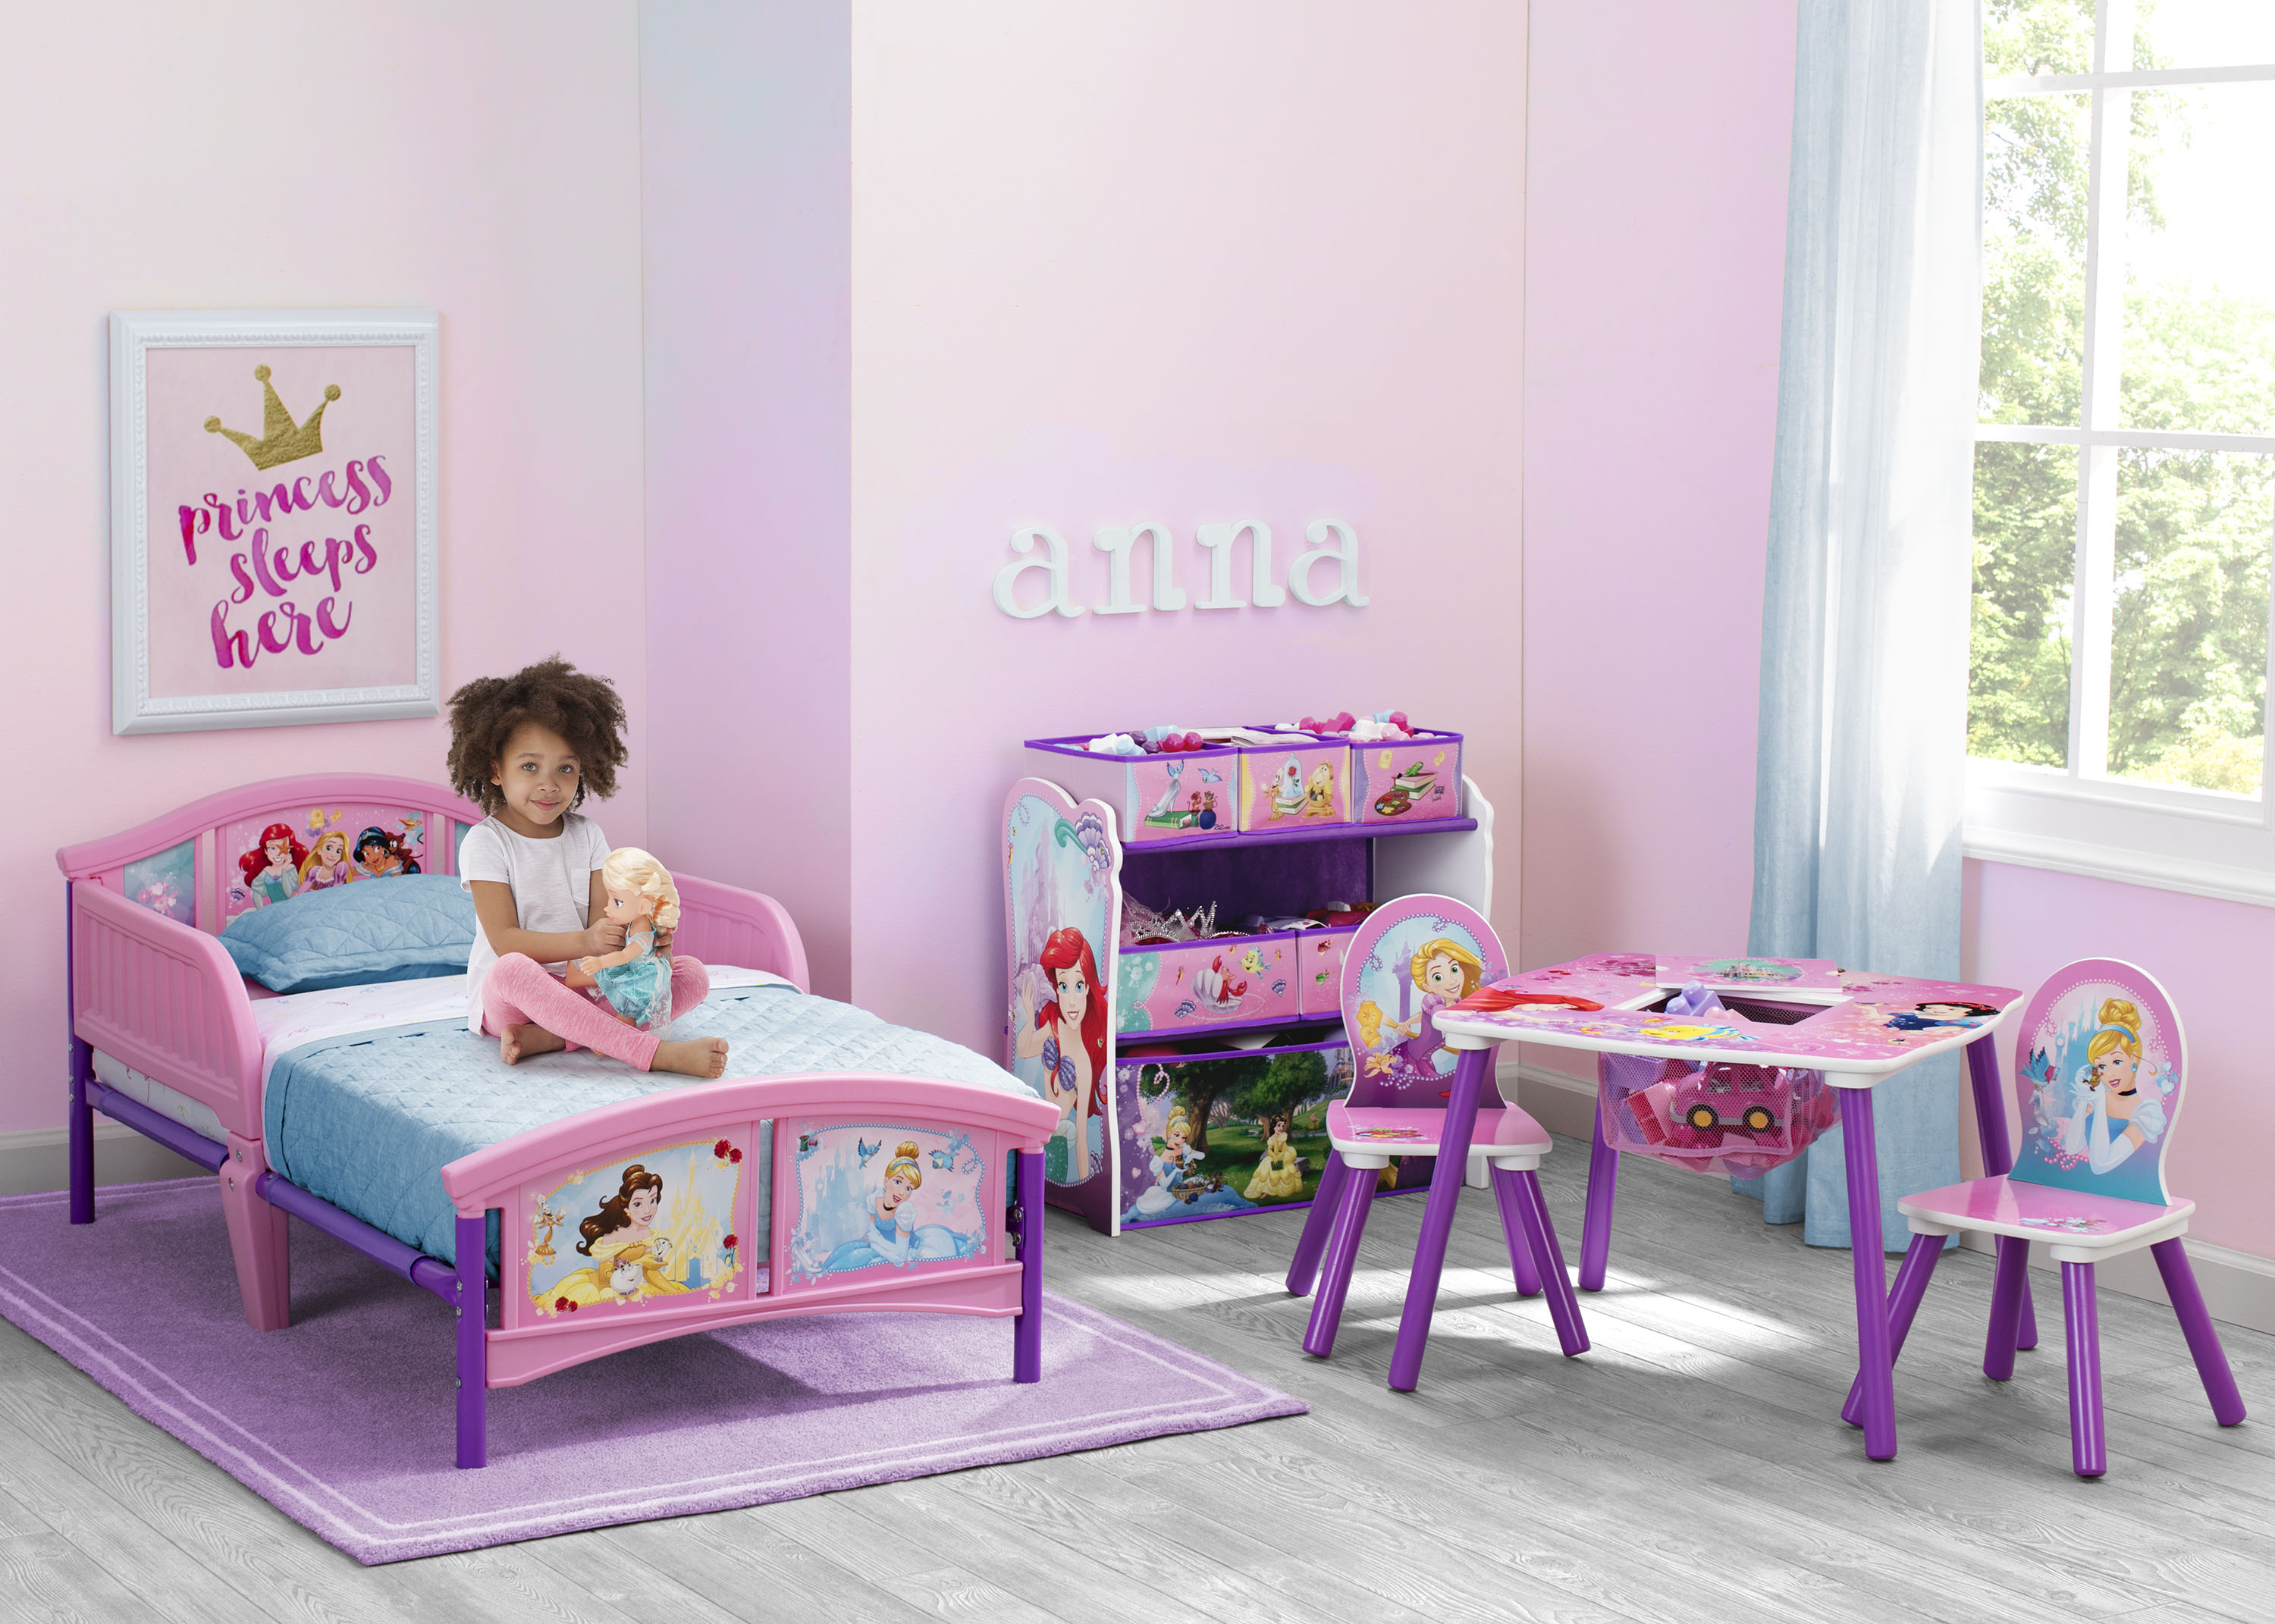 Disney Princess Wood Kids Table and Chair Set with Storage by Delta Children - image 3 of 8